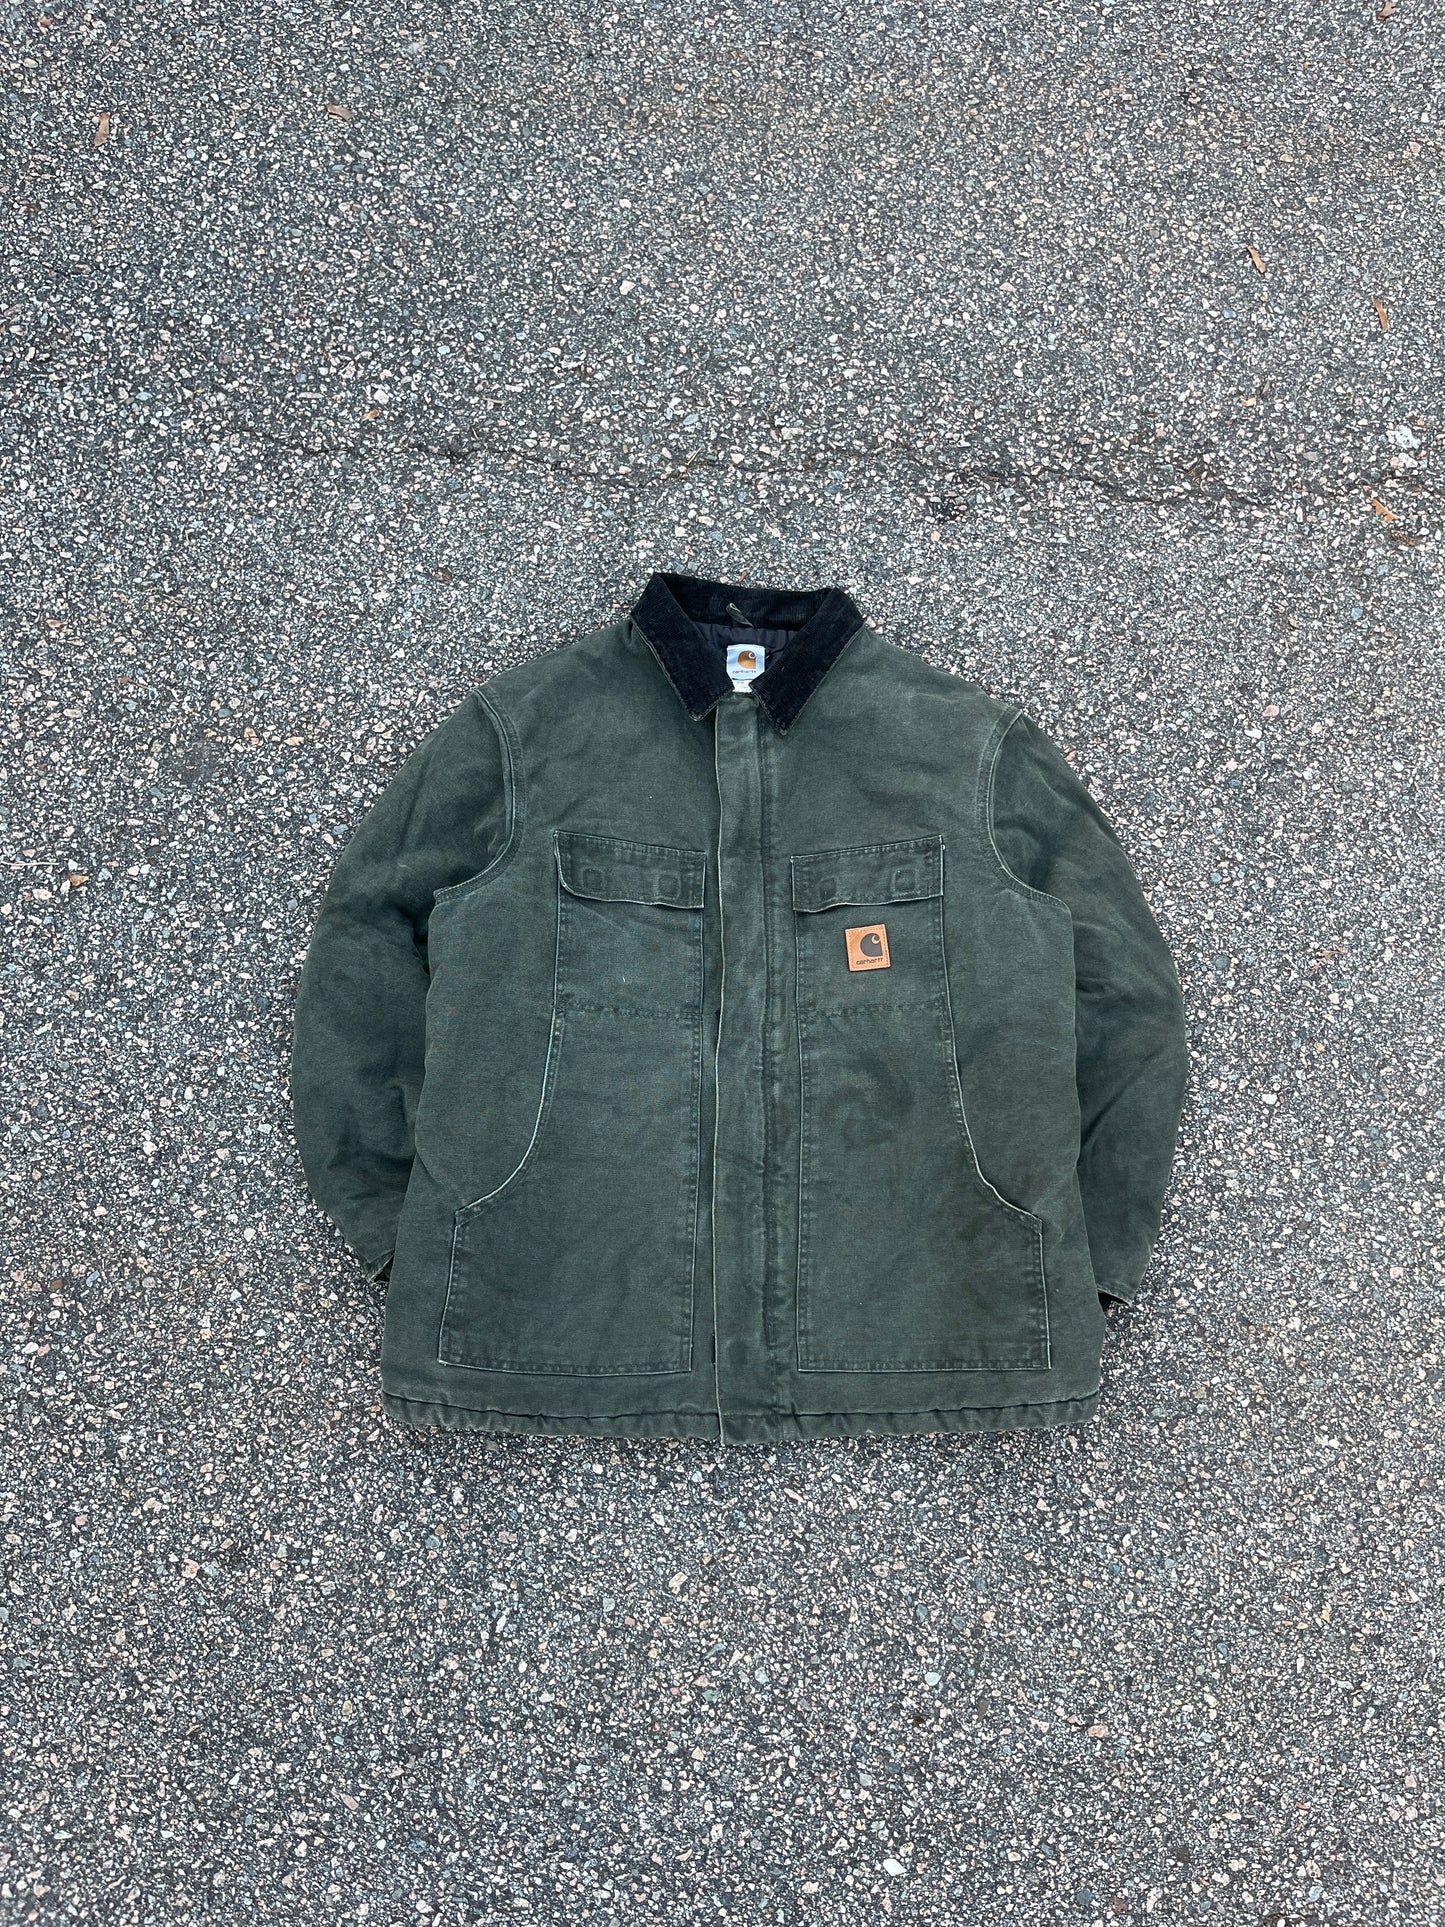 Faded Olive Green Carhartt Arctic Style Jacket - XL